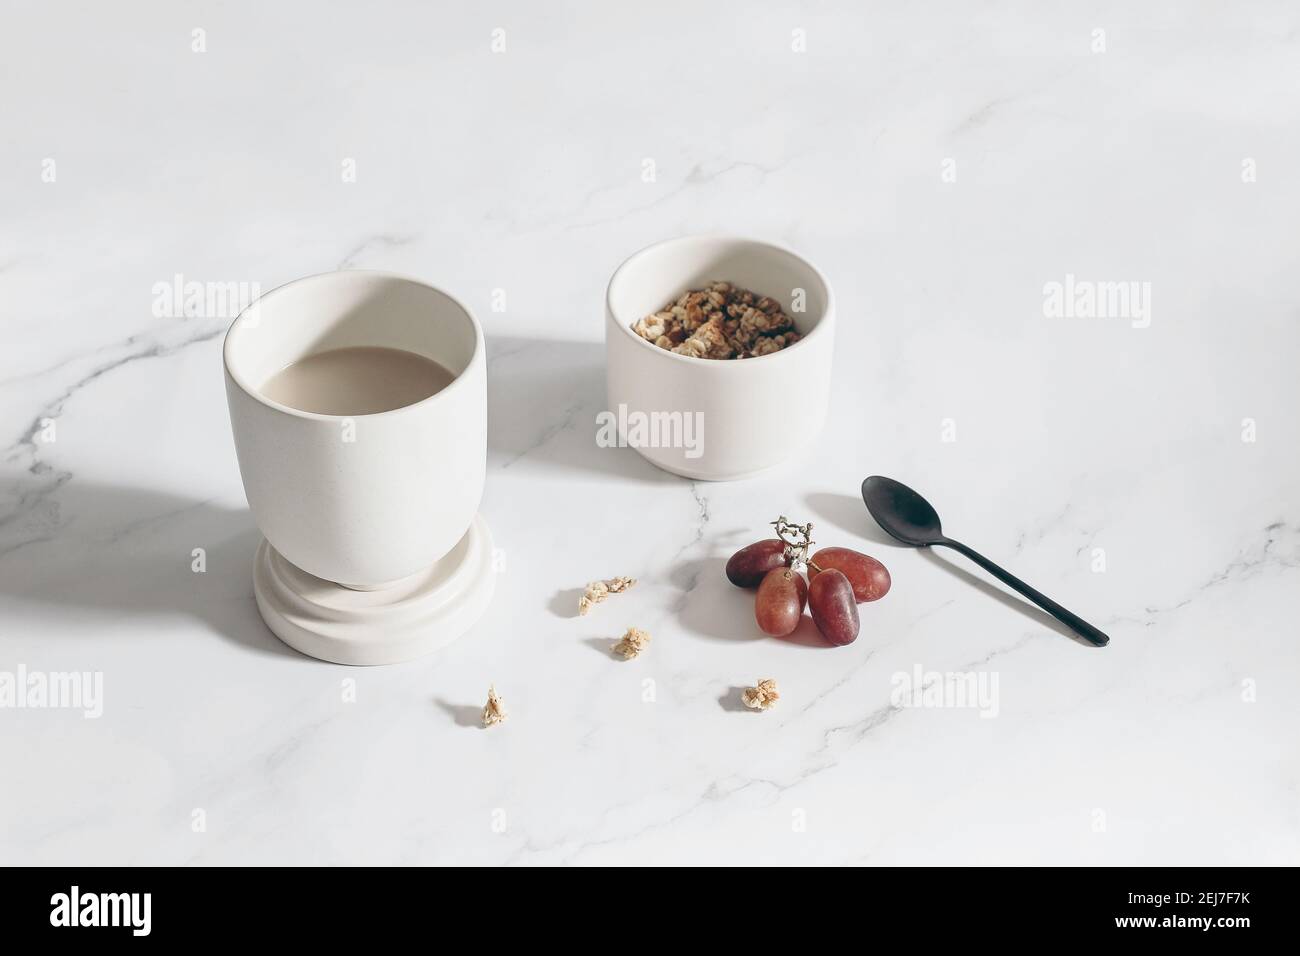 Breakfast, snack still life scene. Cup of coffee, red grapes fruit on white marble table in sunlight. Bowl with muesli, granola and oat cereals and Stock Photo